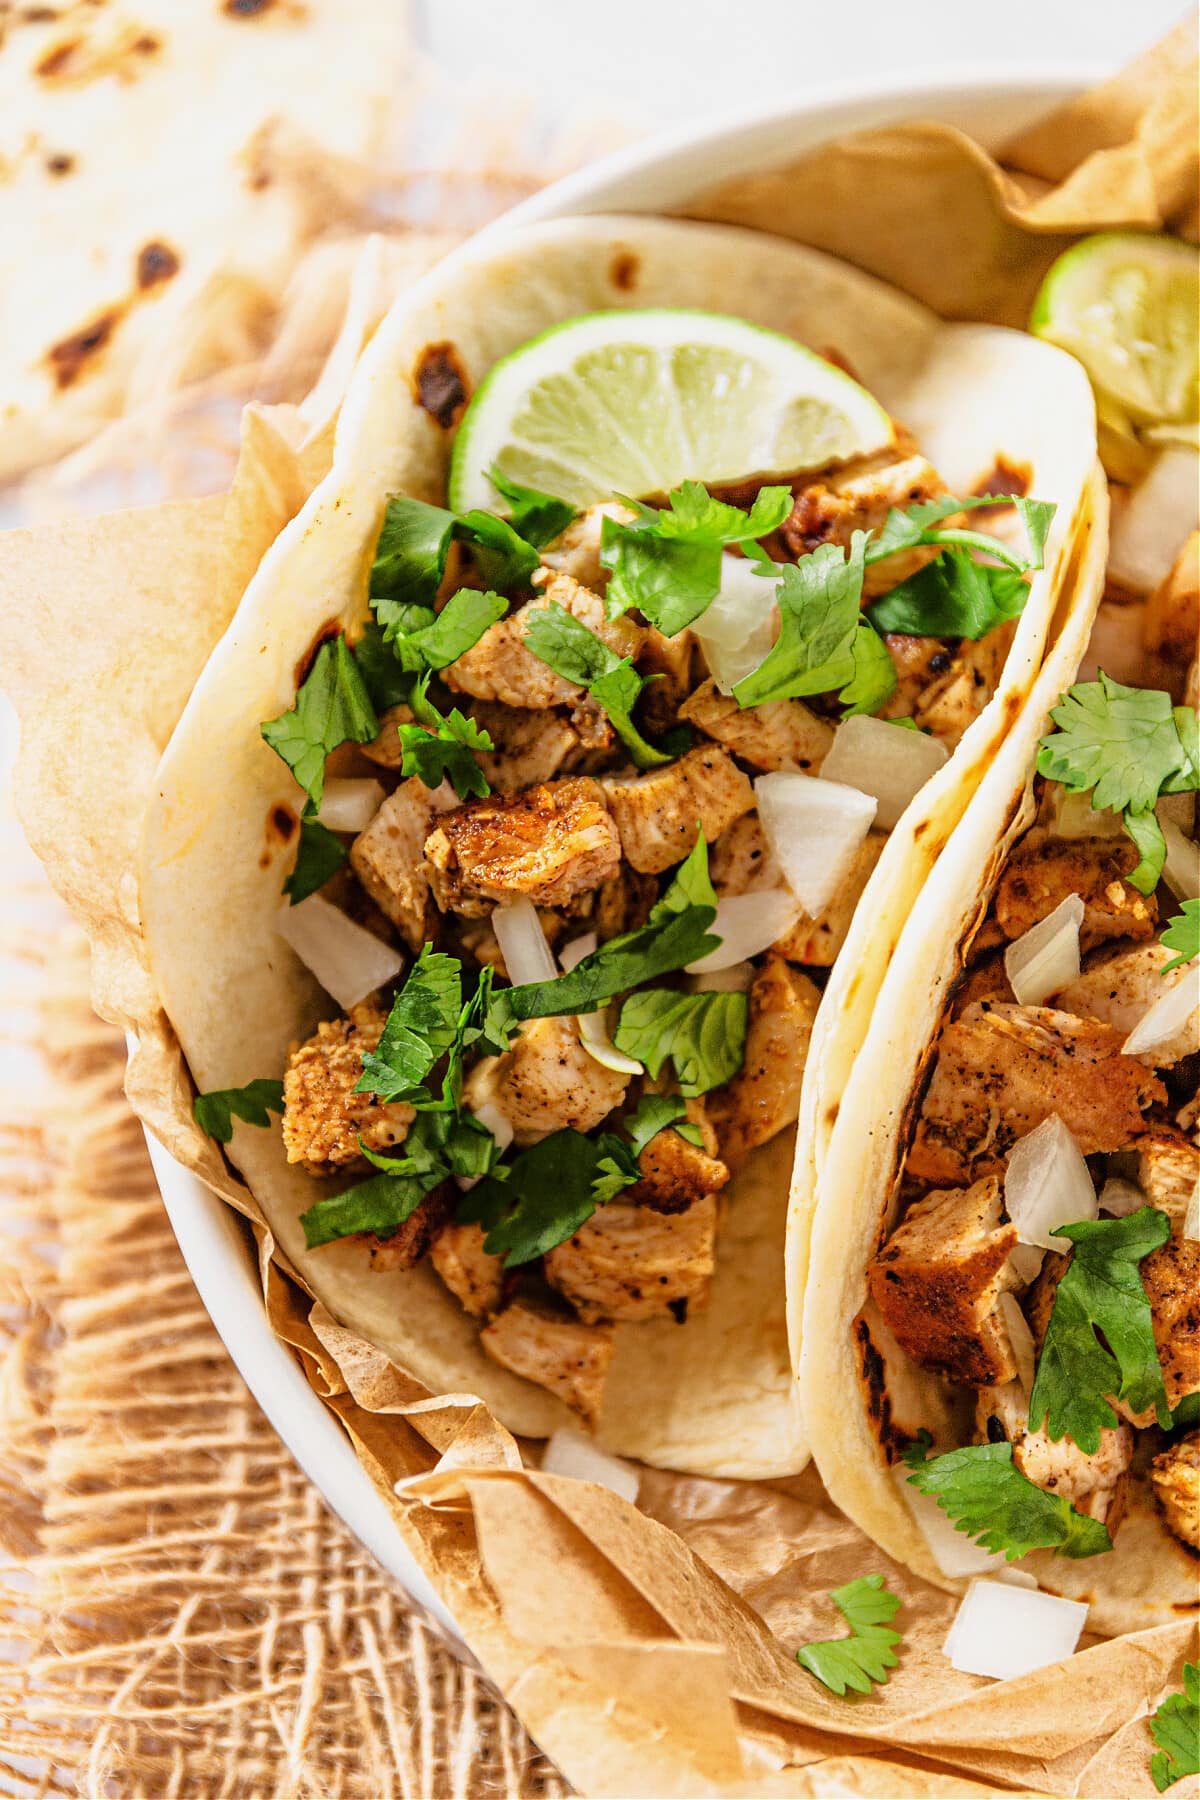 taco with chicken and topped with onions, cilantro and limes